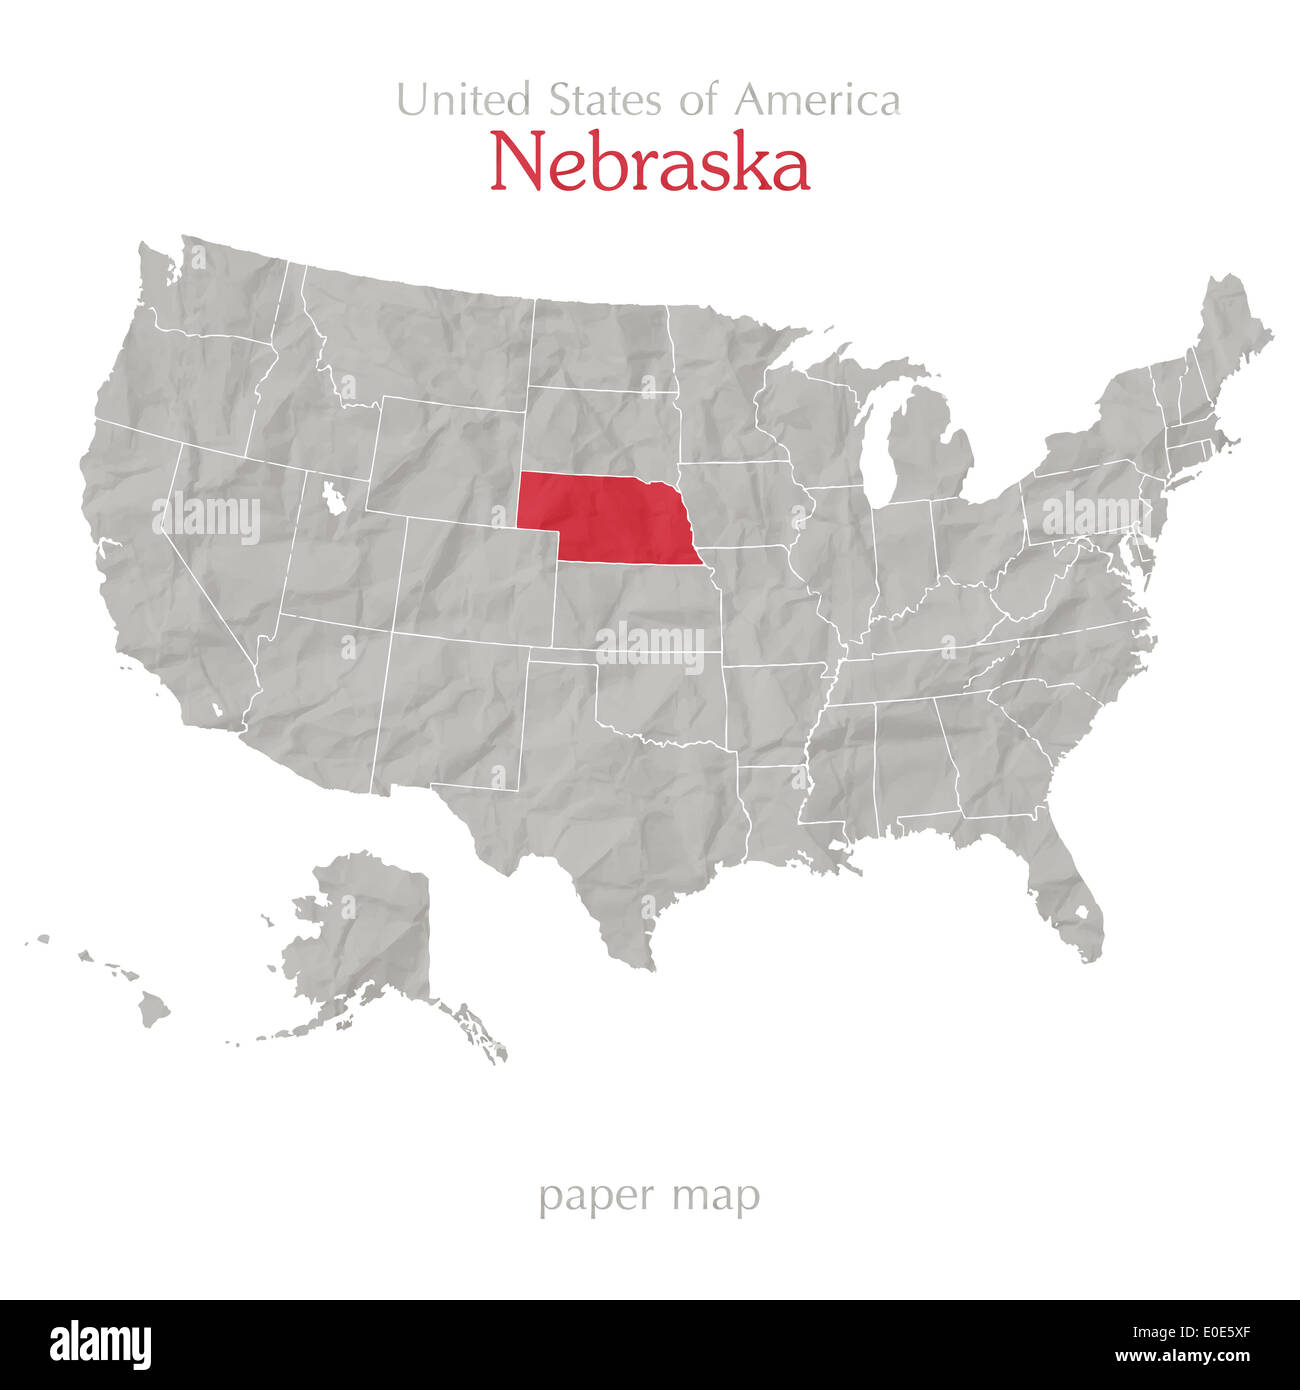 United States Of America Map And Nebraska Territory On Paper Texture Stock Photo 69153463 Alamy